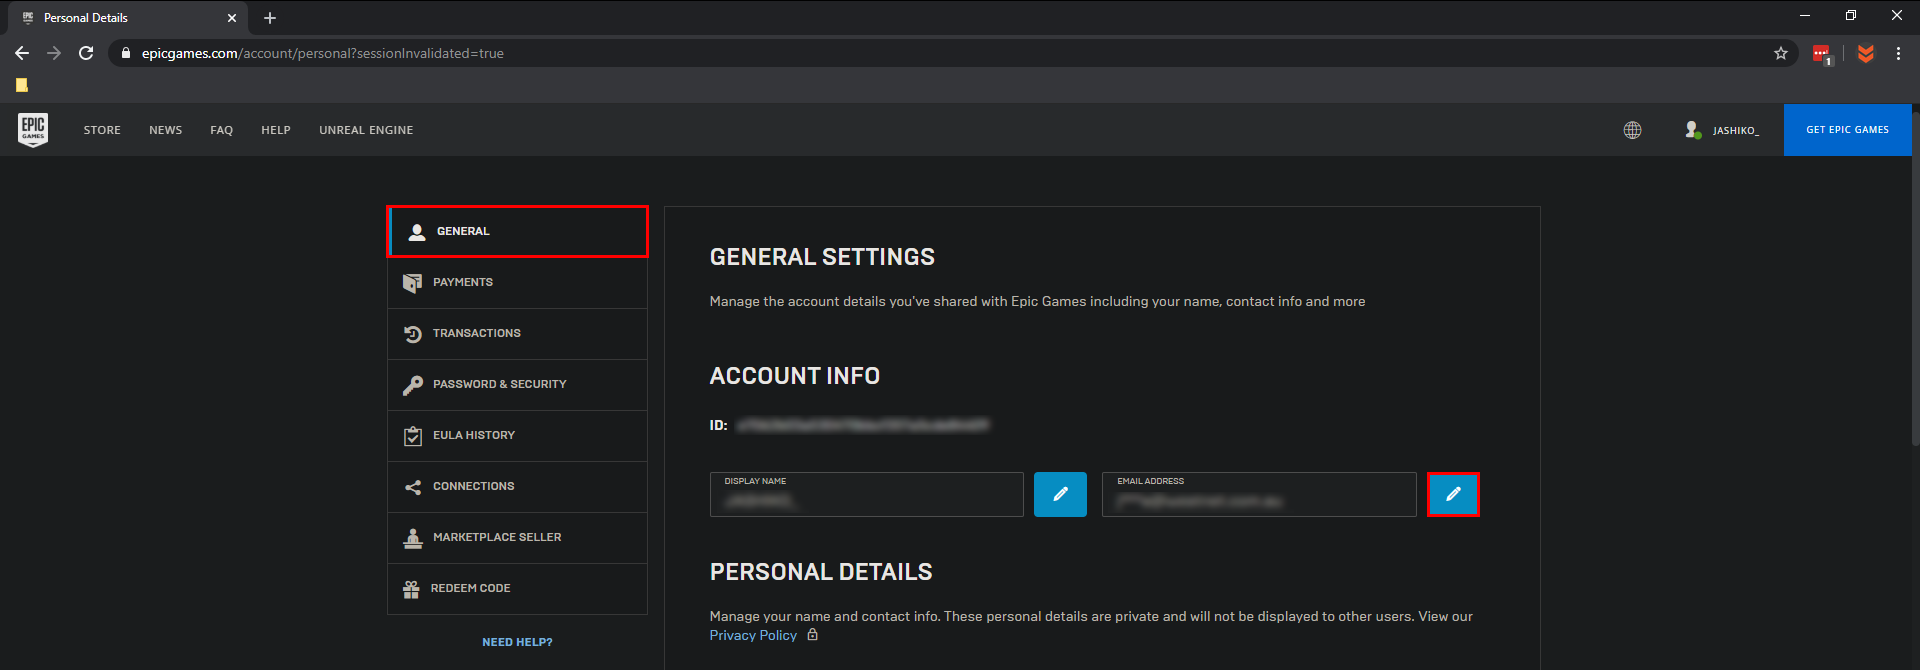 How to change my email address on my Epic games account if I do not have  access to the original email address - Quora